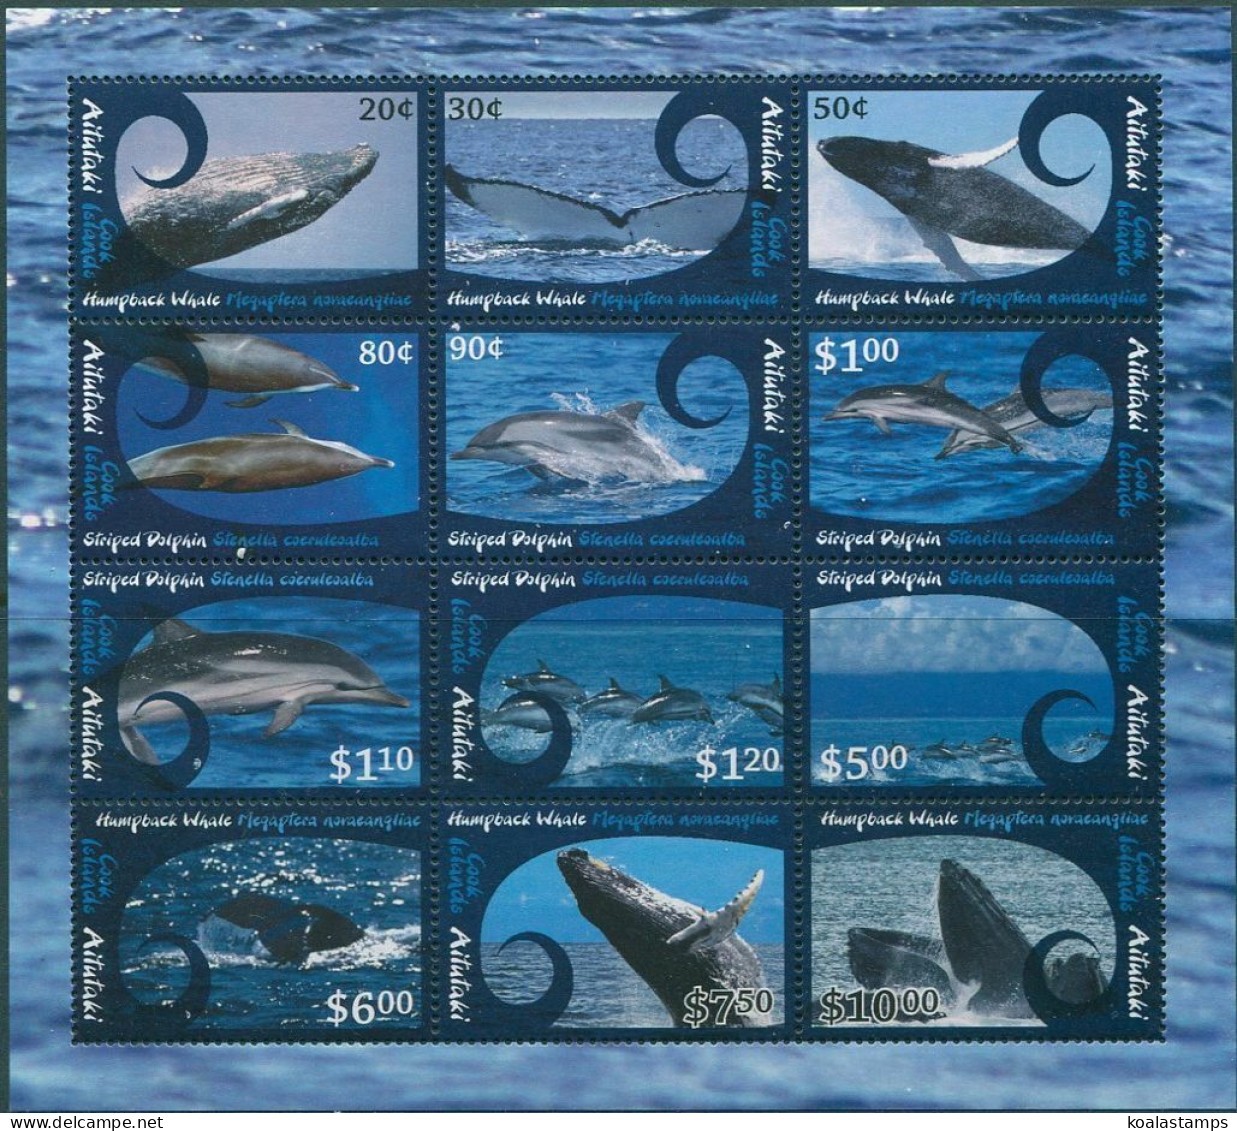 Aitutaki 2012 SG802 Whales Dolphins MS MNH - Cook Islands